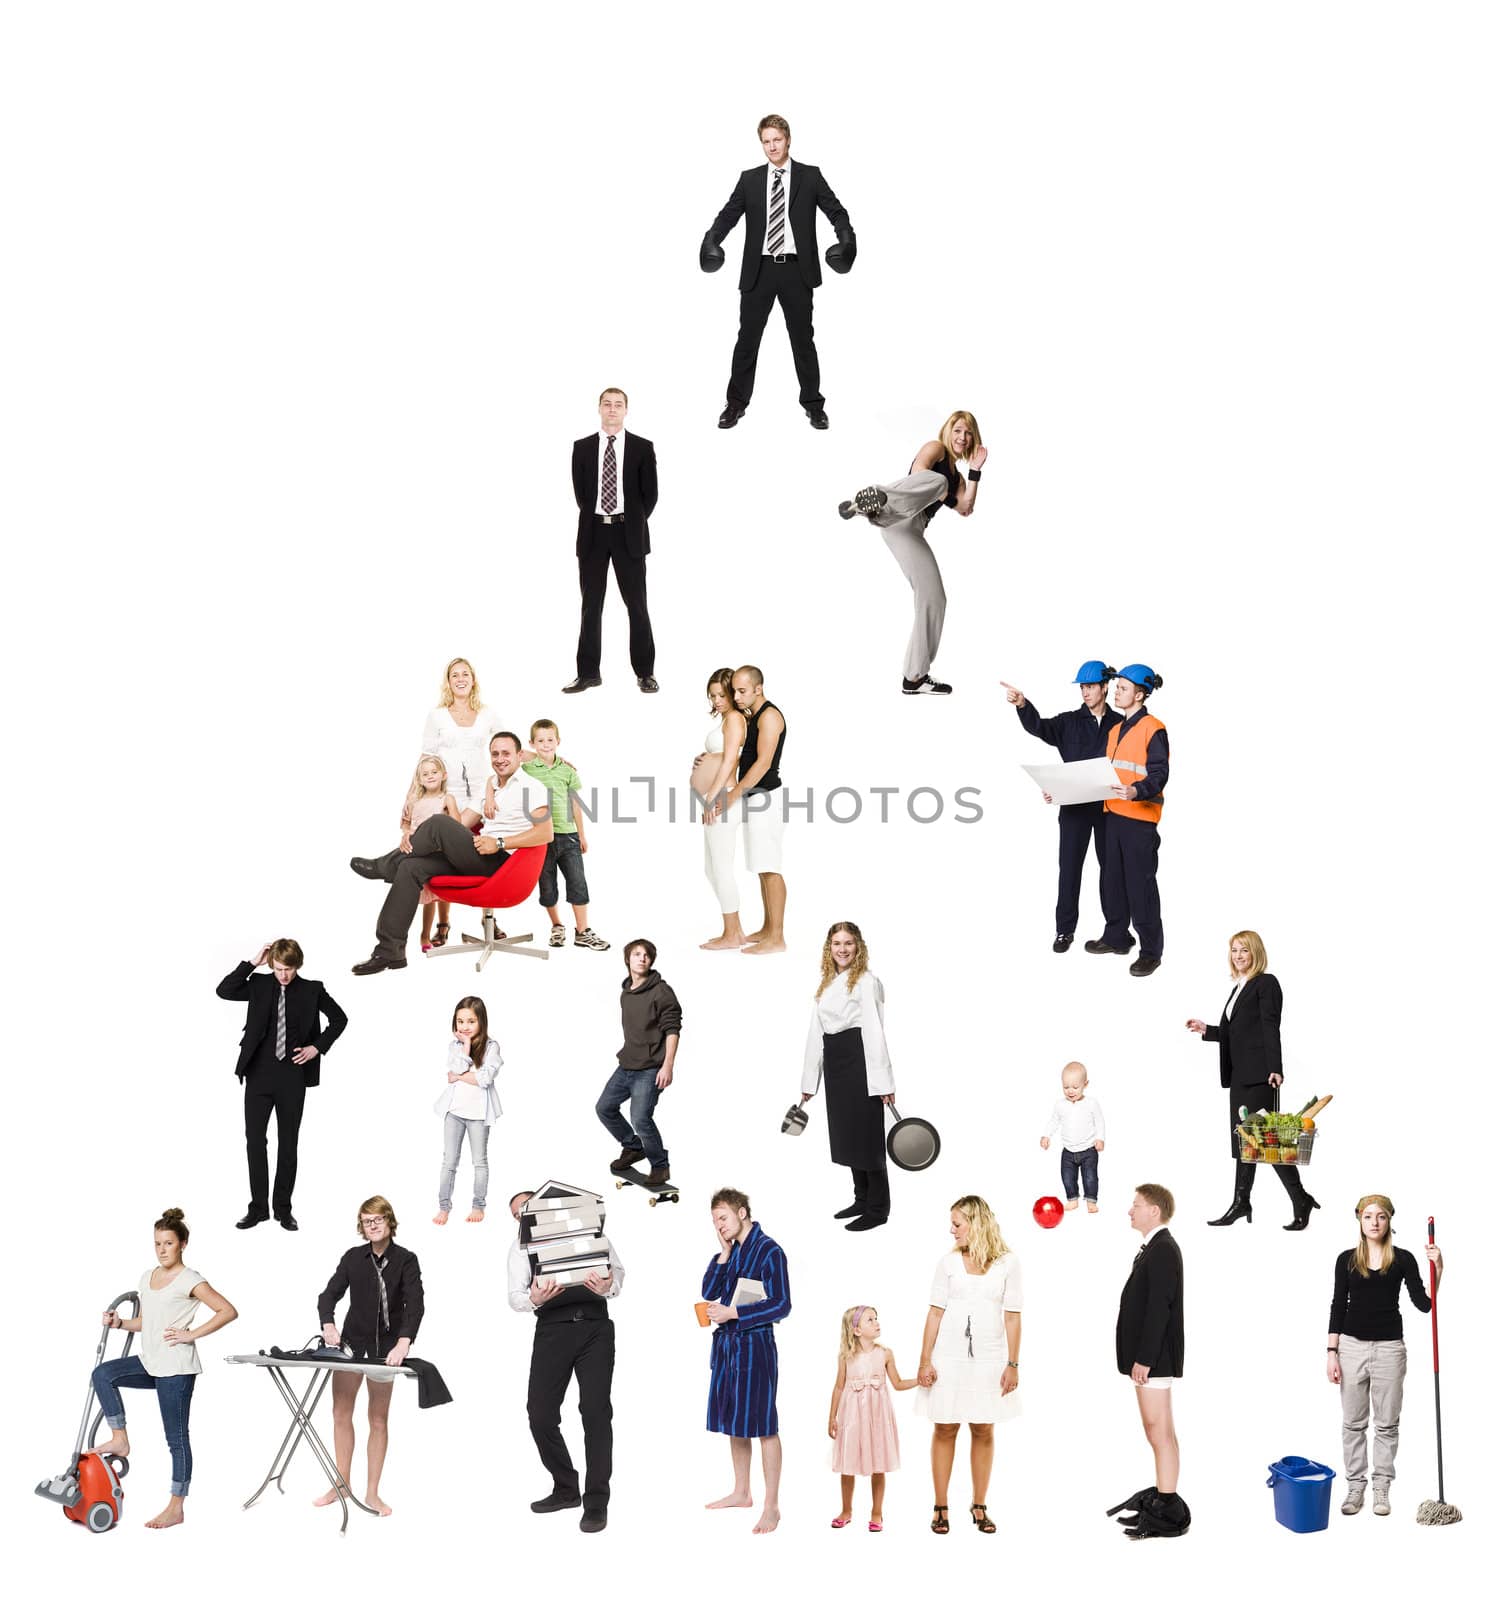 Pyramid of Real People by gemenacom